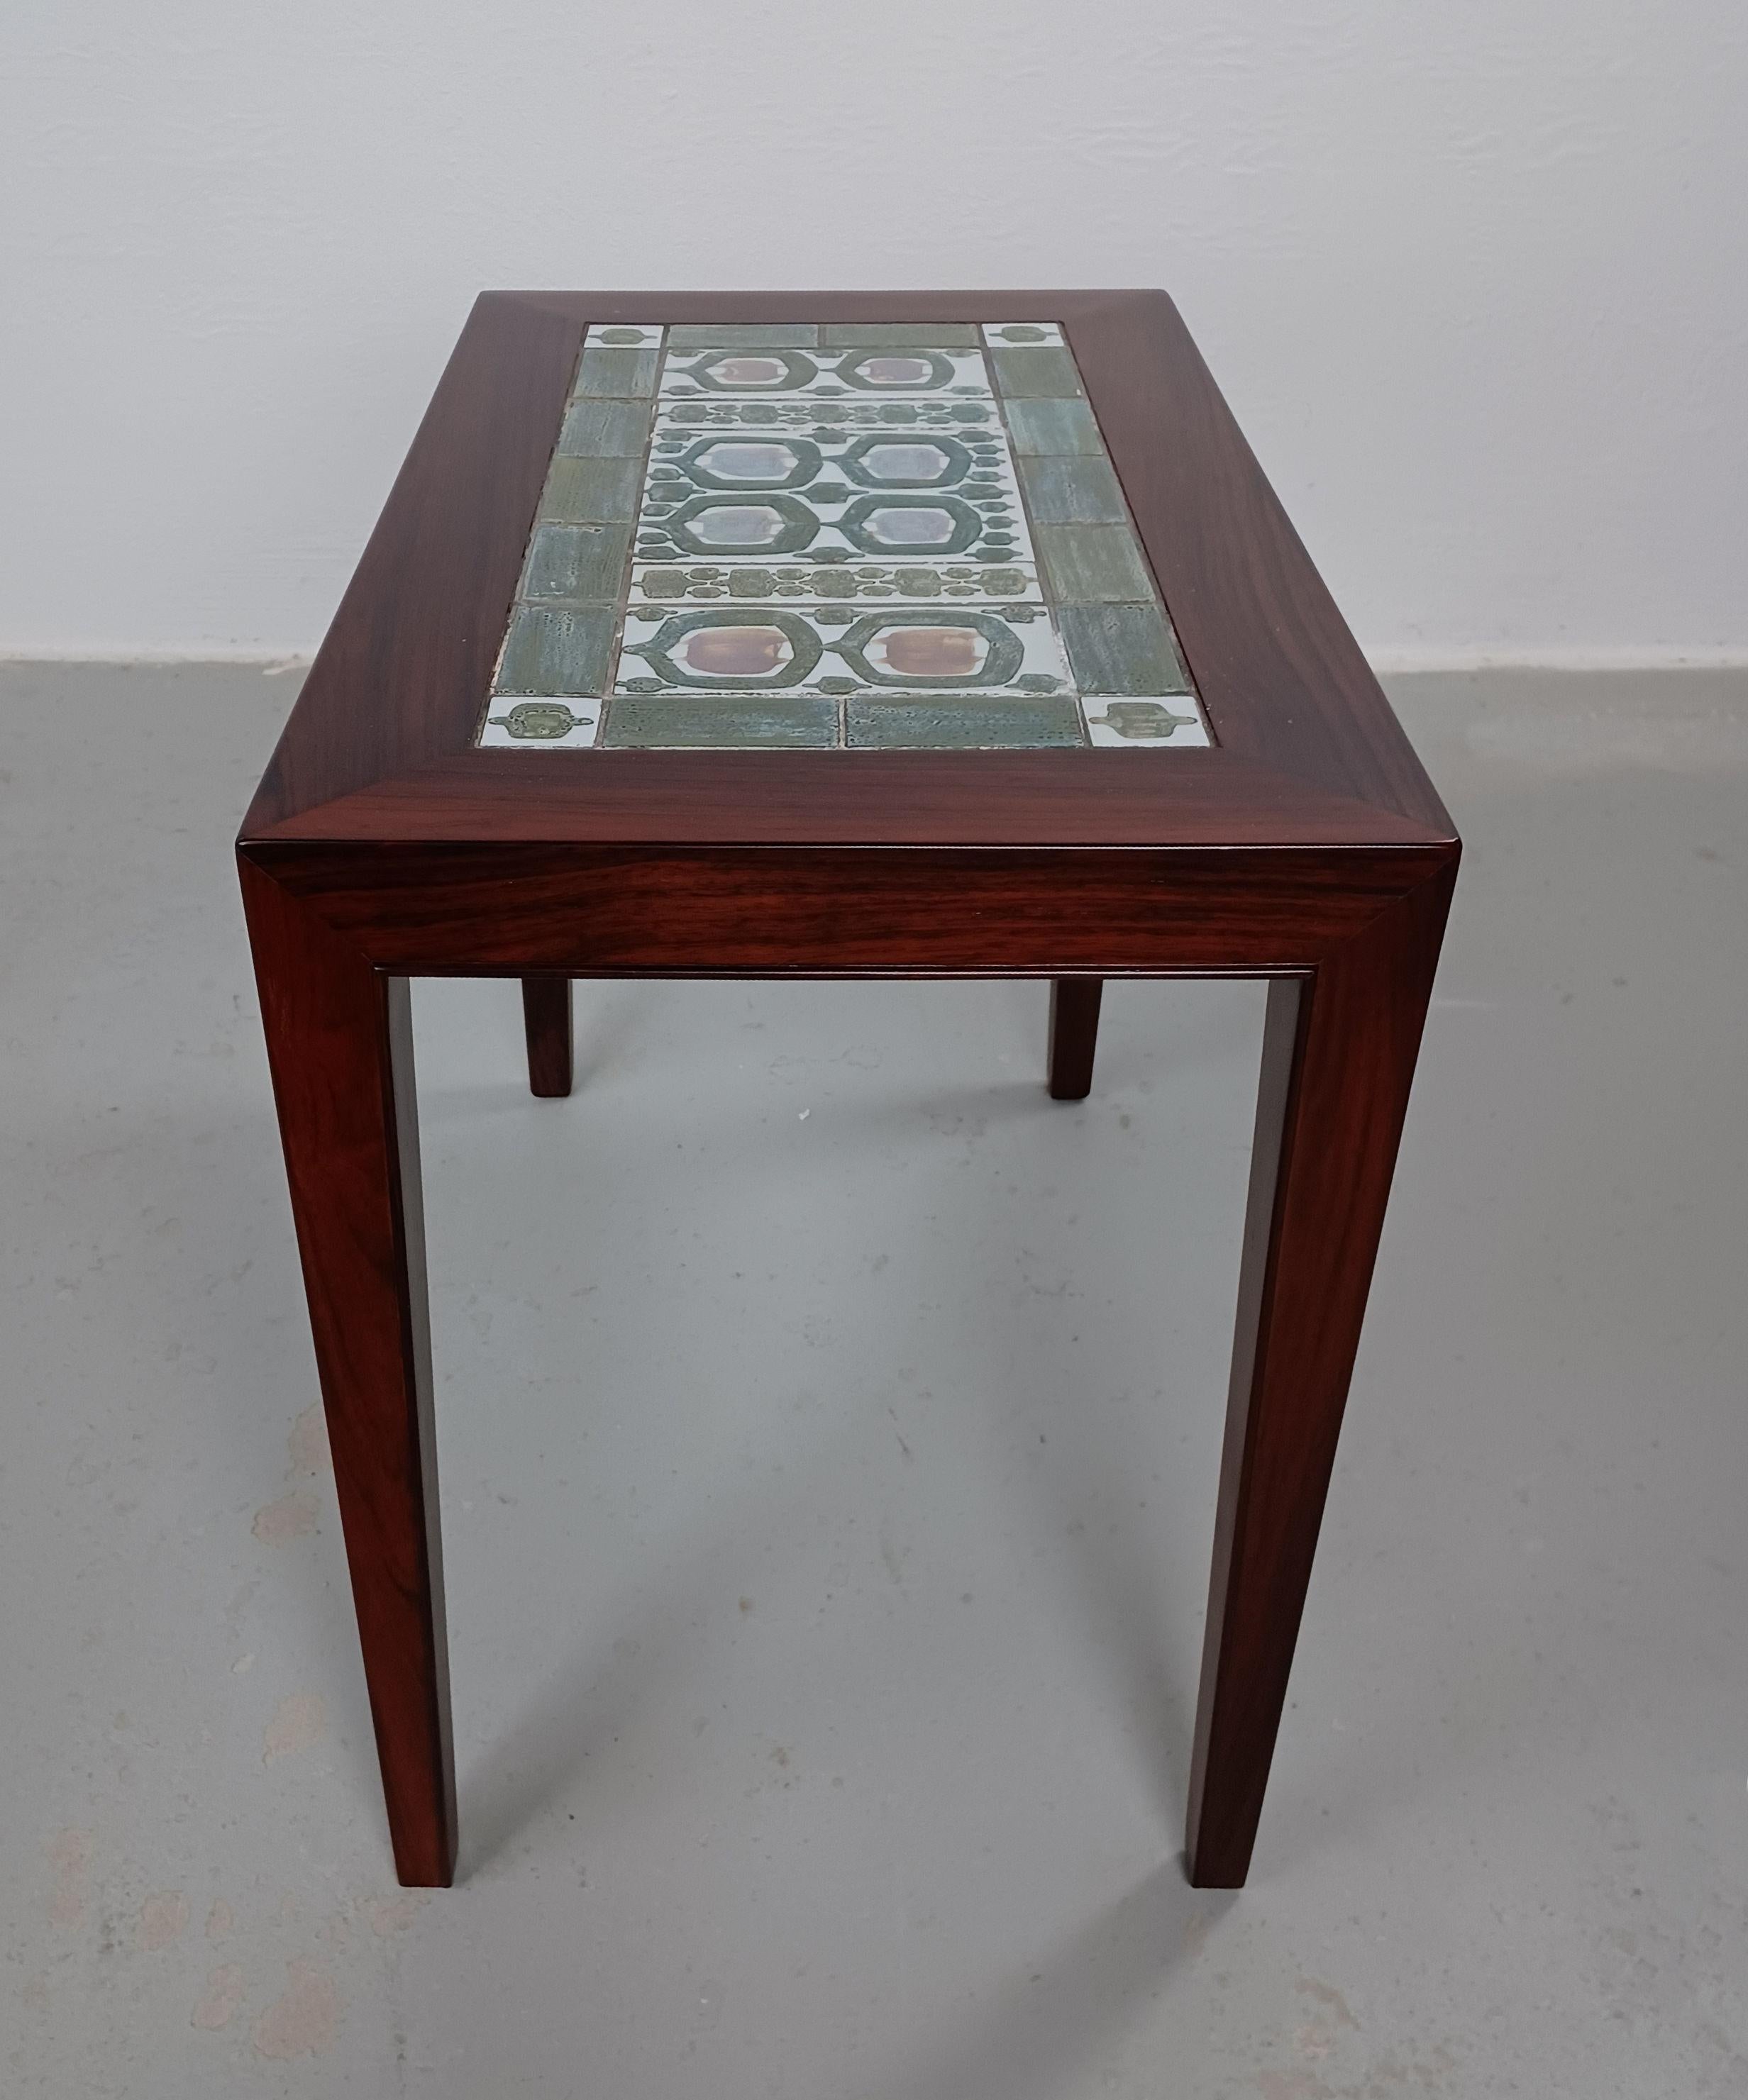 1970s Severin Hansen Rosewood Side Tables Nils Thorsson Royal Copenhagen Tiles In Good Condition For Sale In Knebel, DK